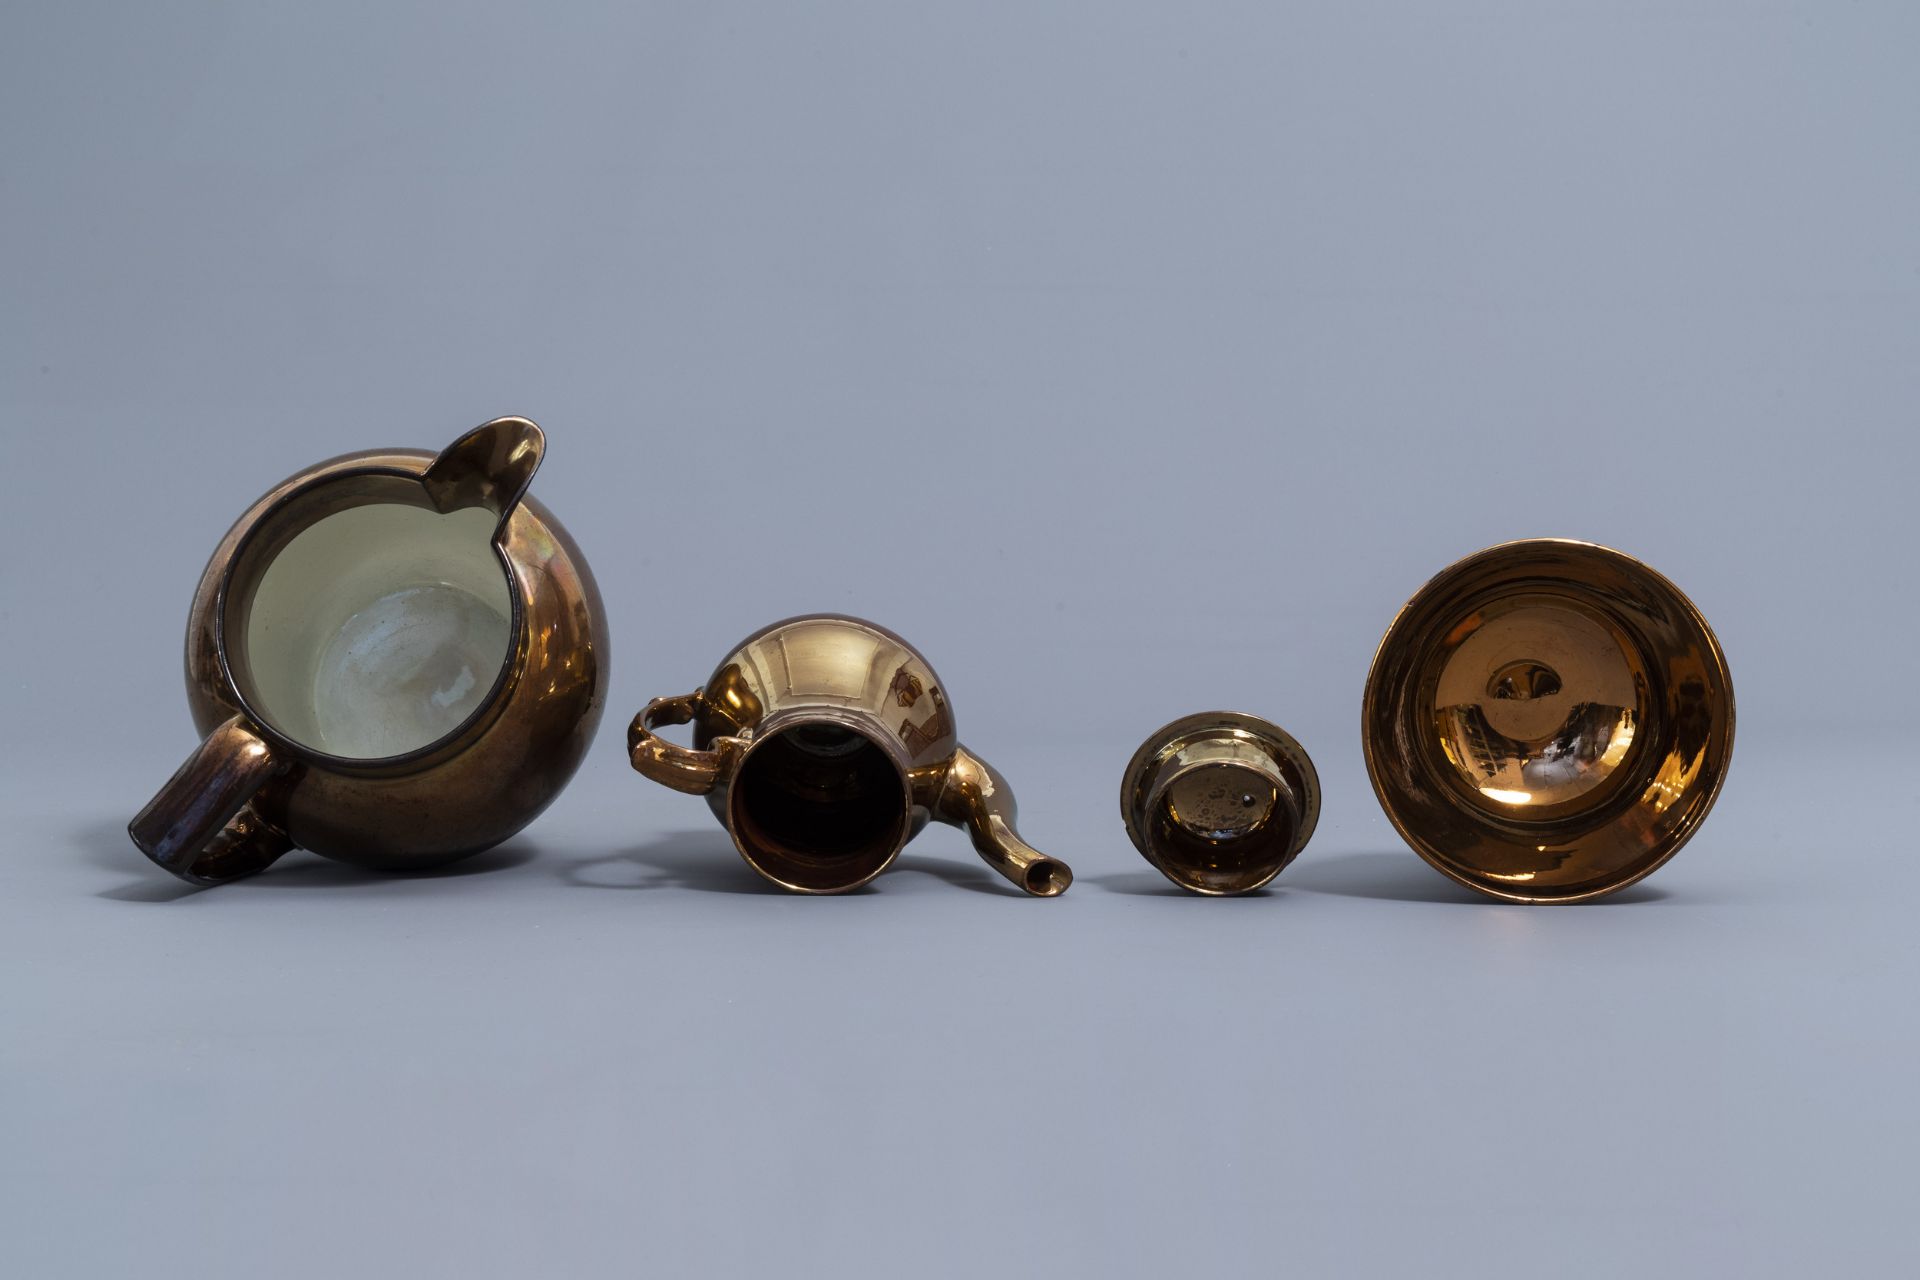 A varied collection of English monochrome copper lustreware items, 19th C. - Image 48 of 50